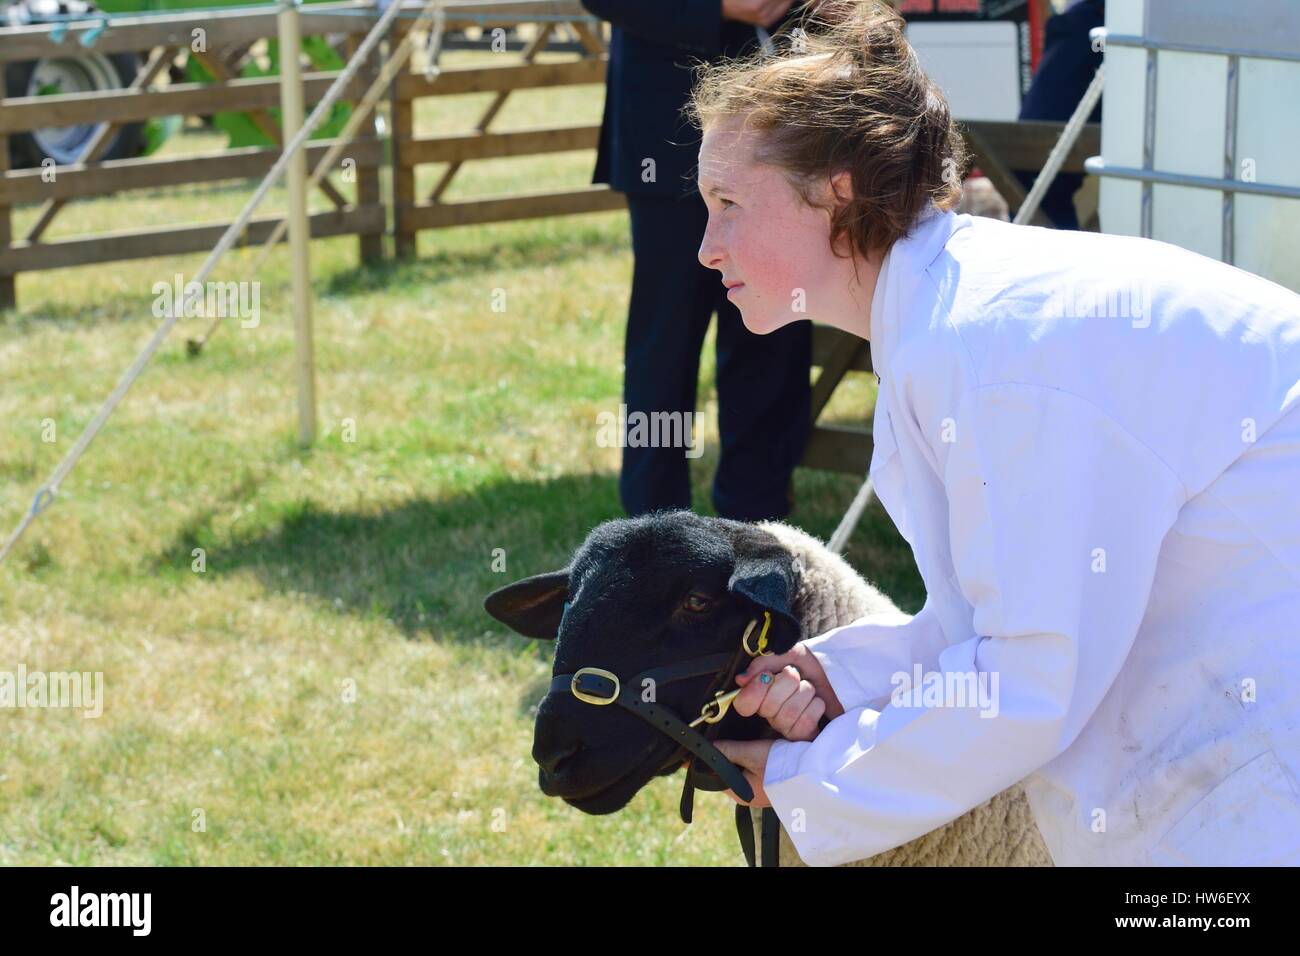 TENDRING SHOW ESSEX 11 JULY  2015: Sheep being Exhibited at Agricultural show Stock Photo